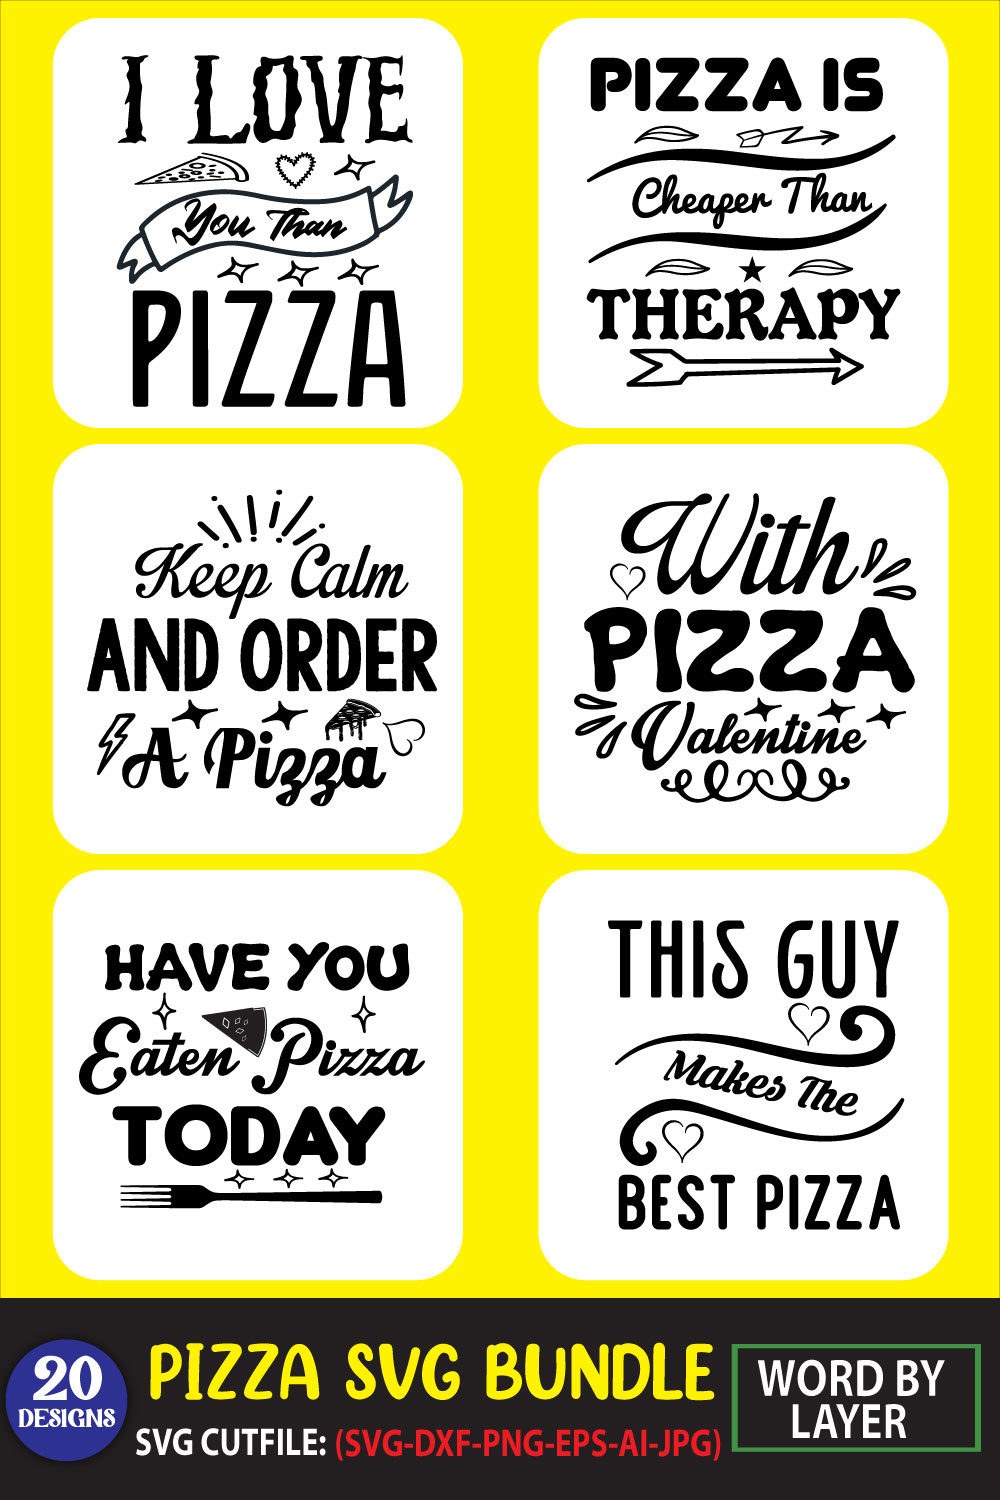 Collection of wonderful images for prints on the theme of pizza